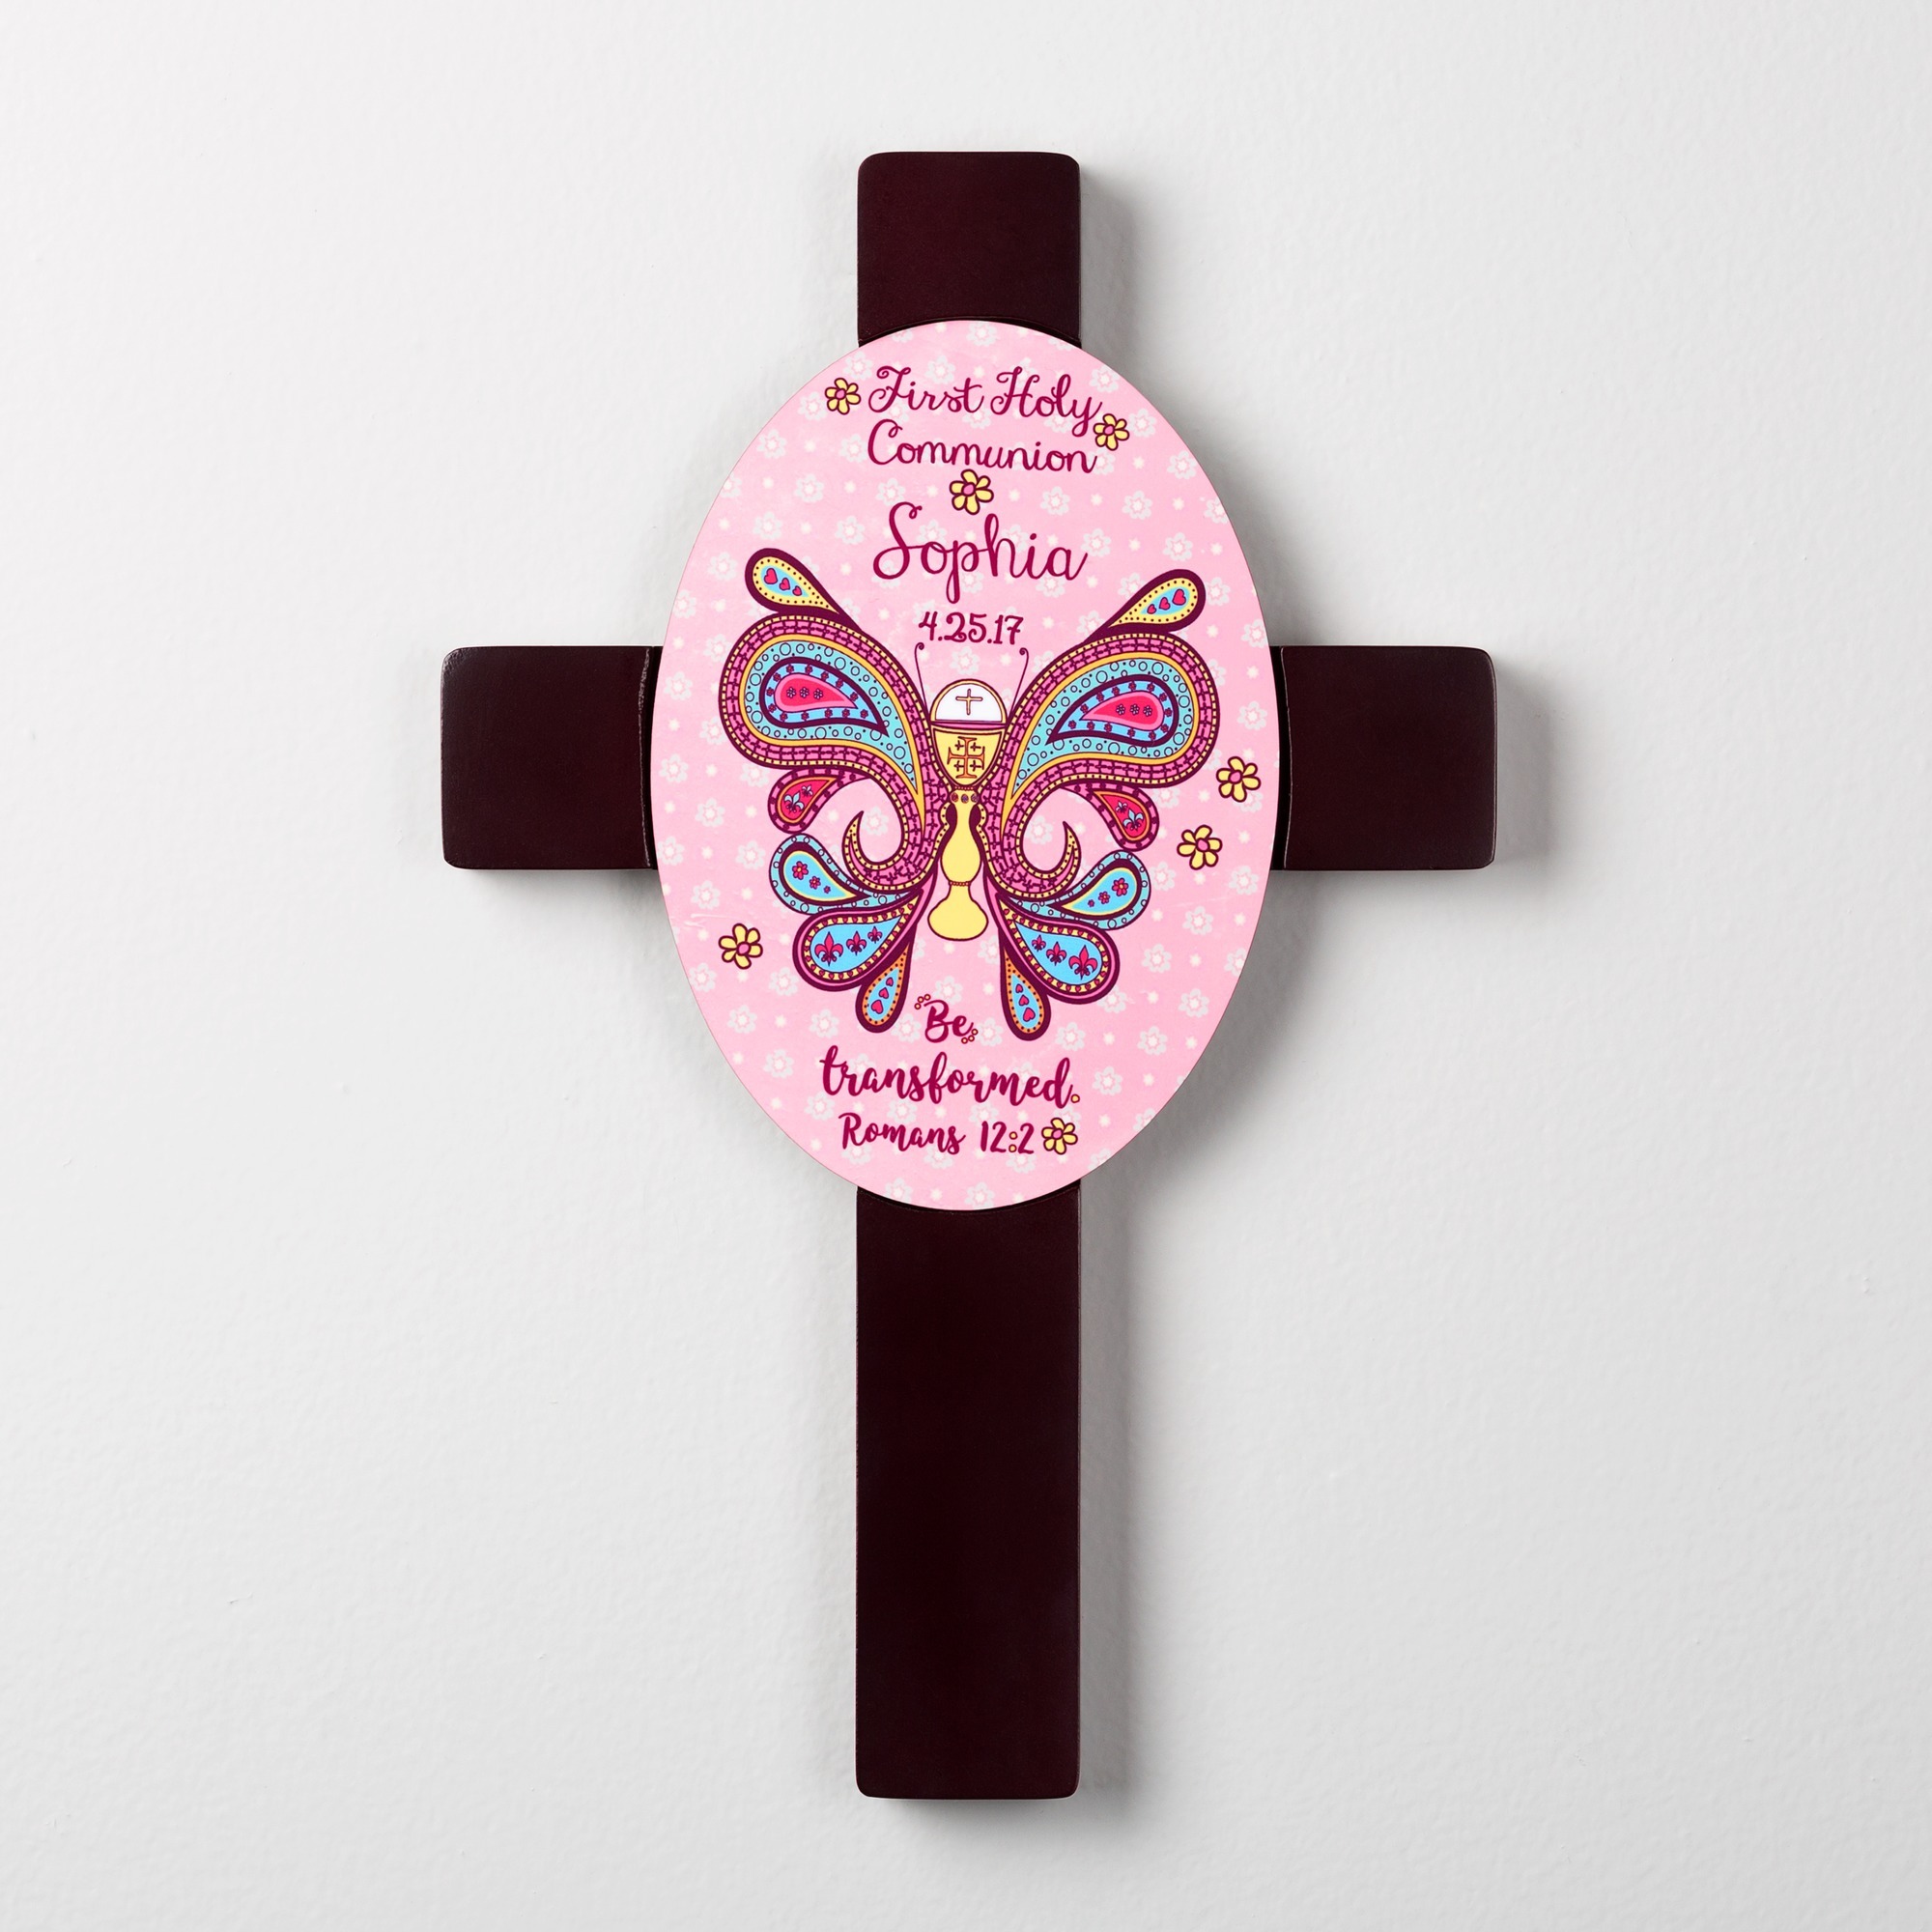 First Holy Communion Cross